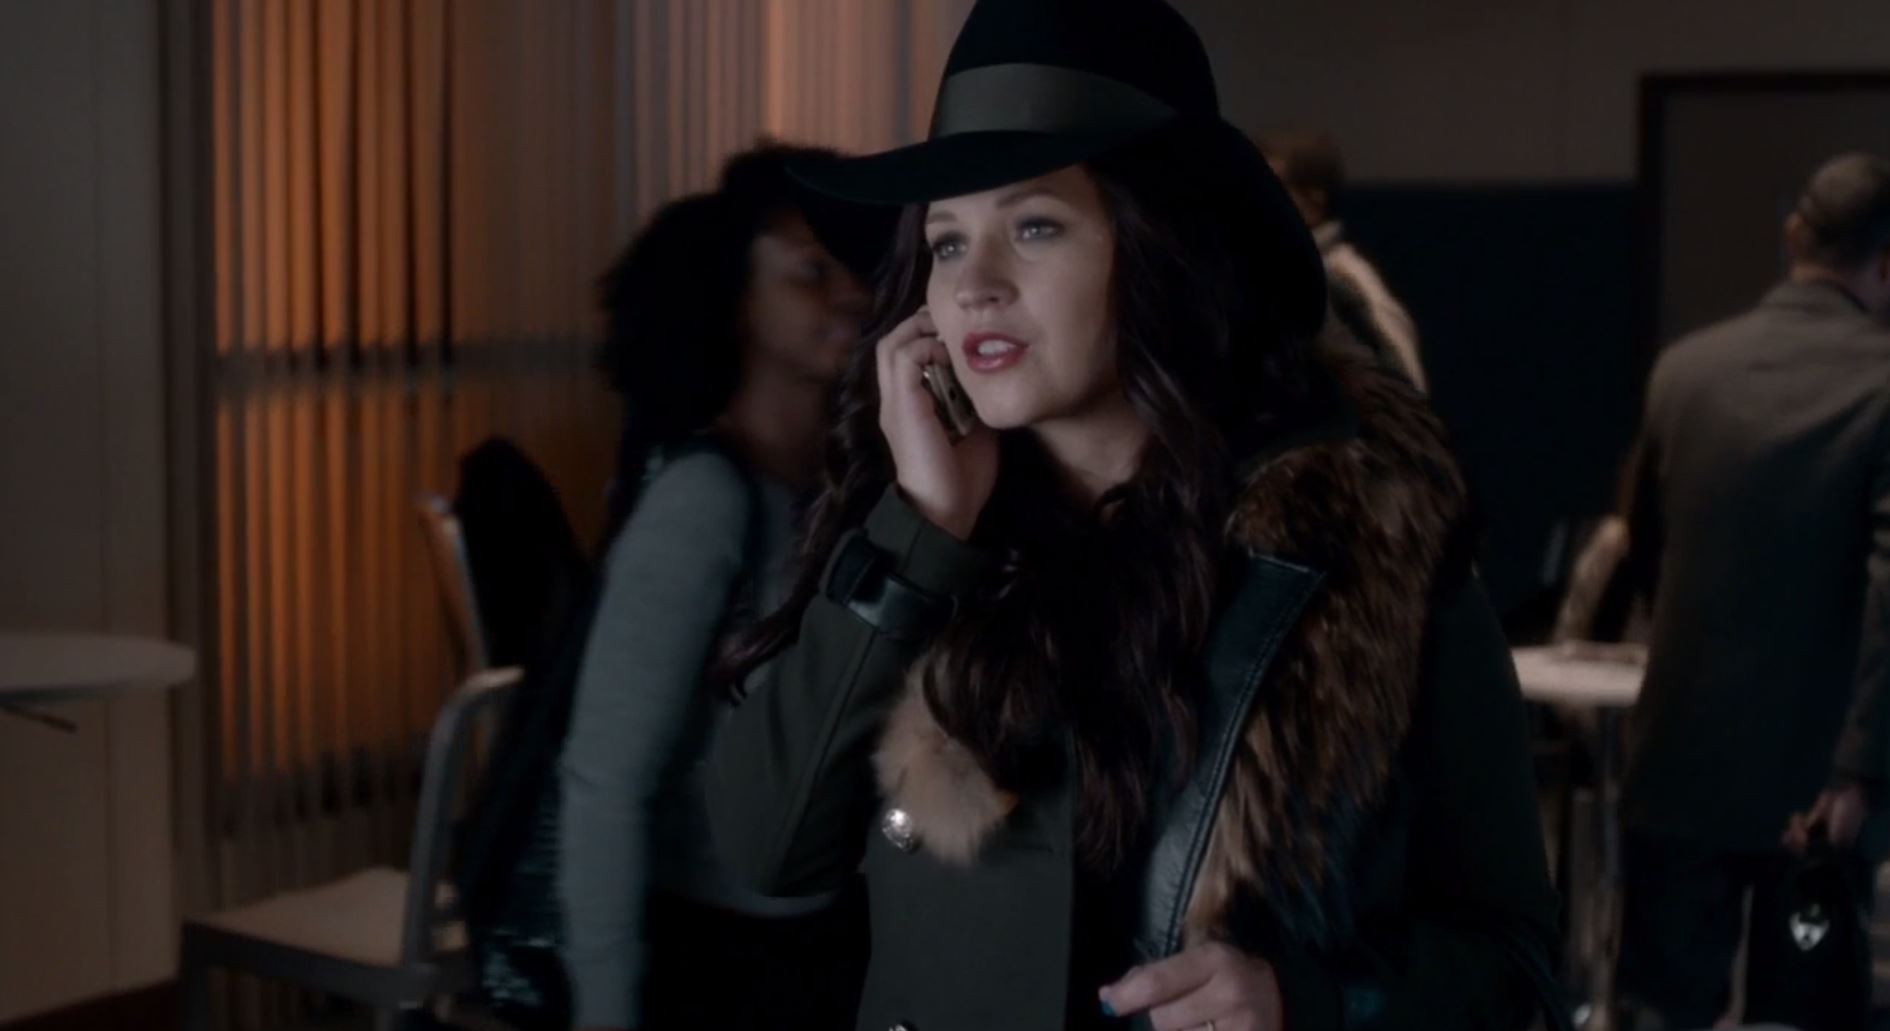 Charlotte in a brown wig and large hat talking on a cell phone